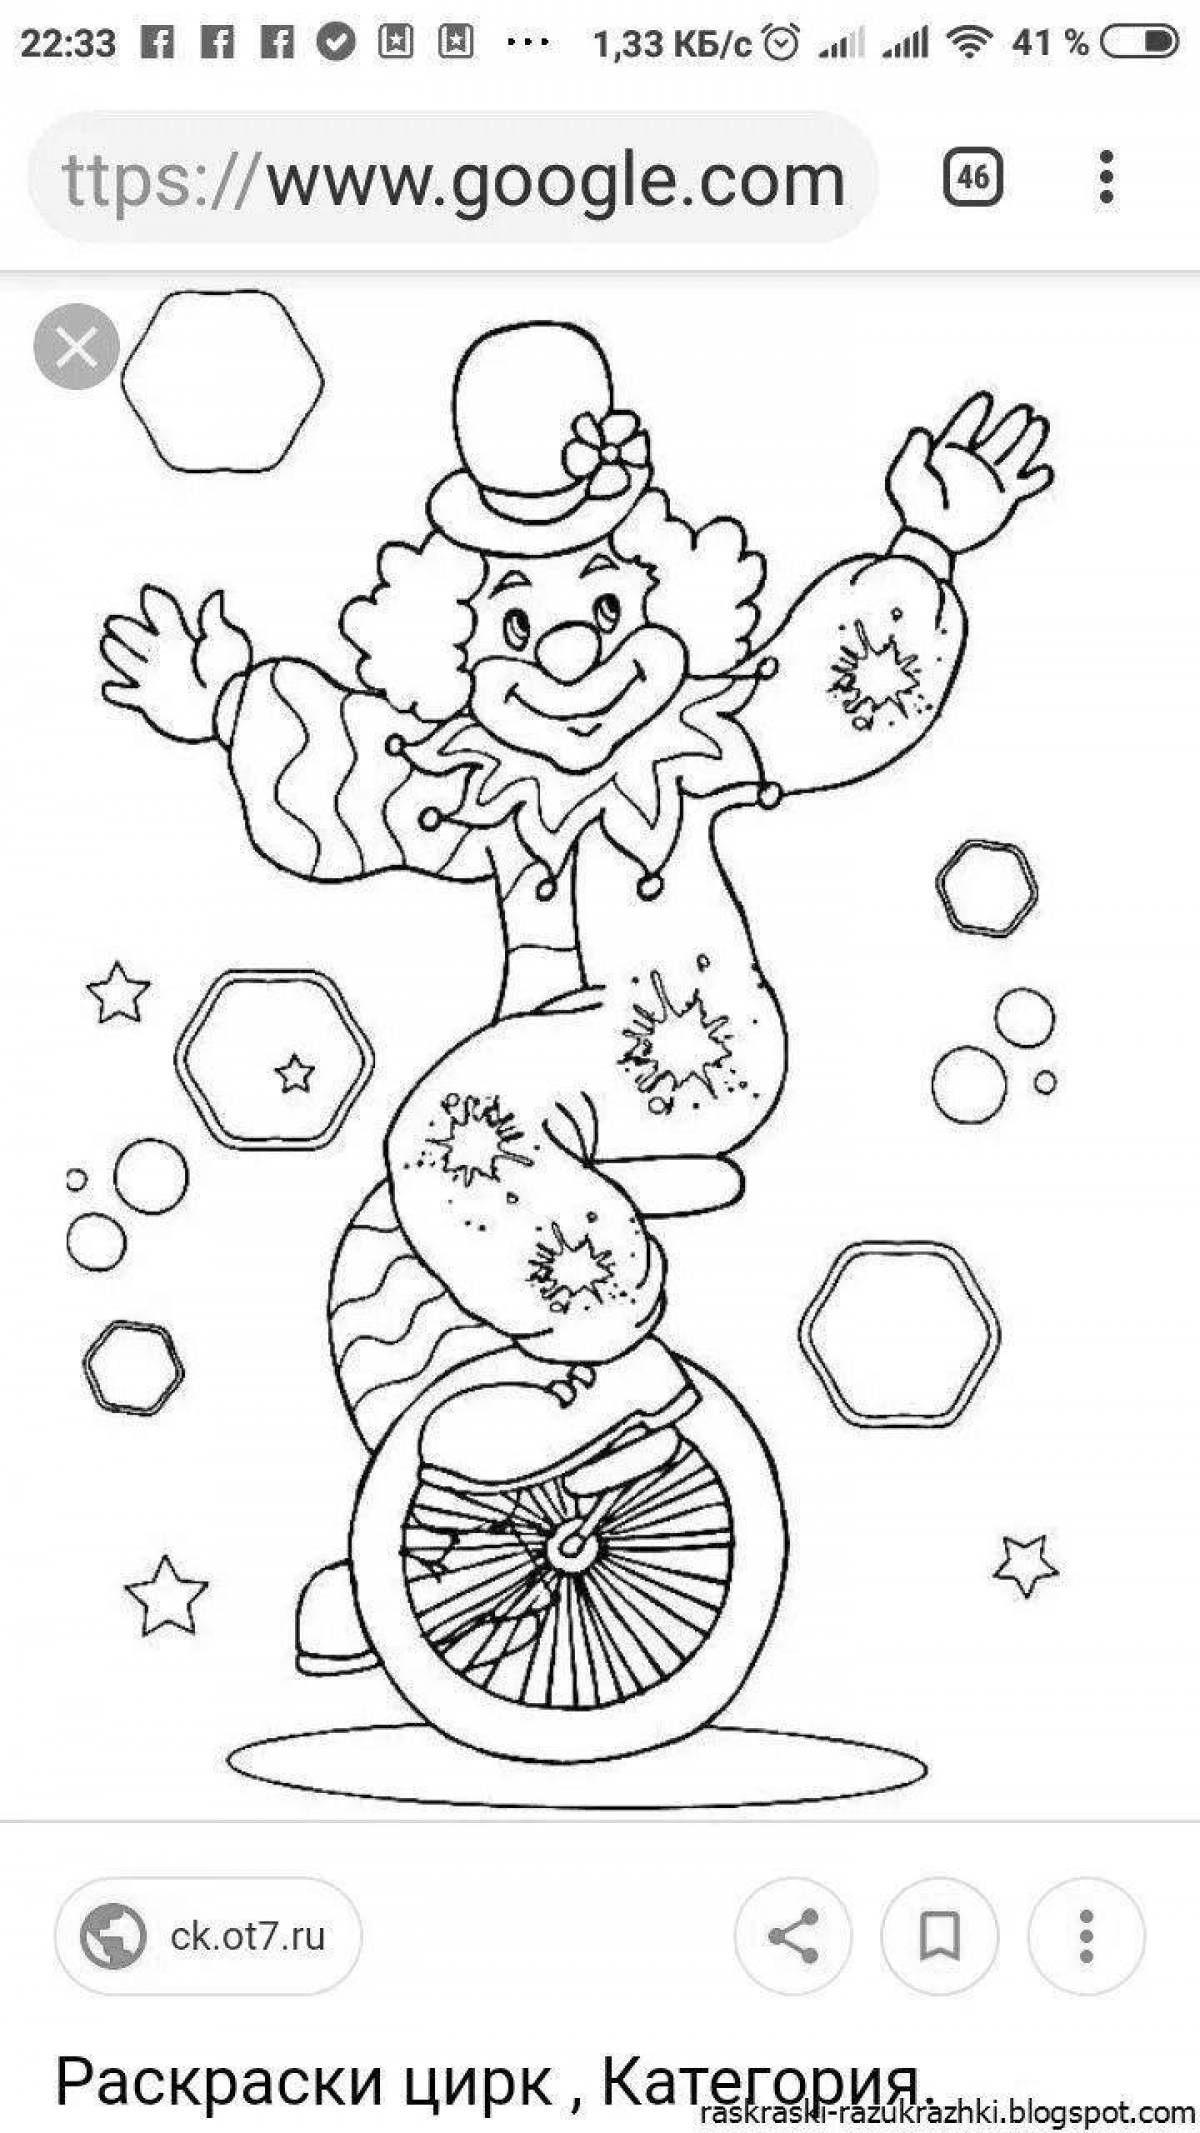 Fun circus coloring book for 4-5 year olds